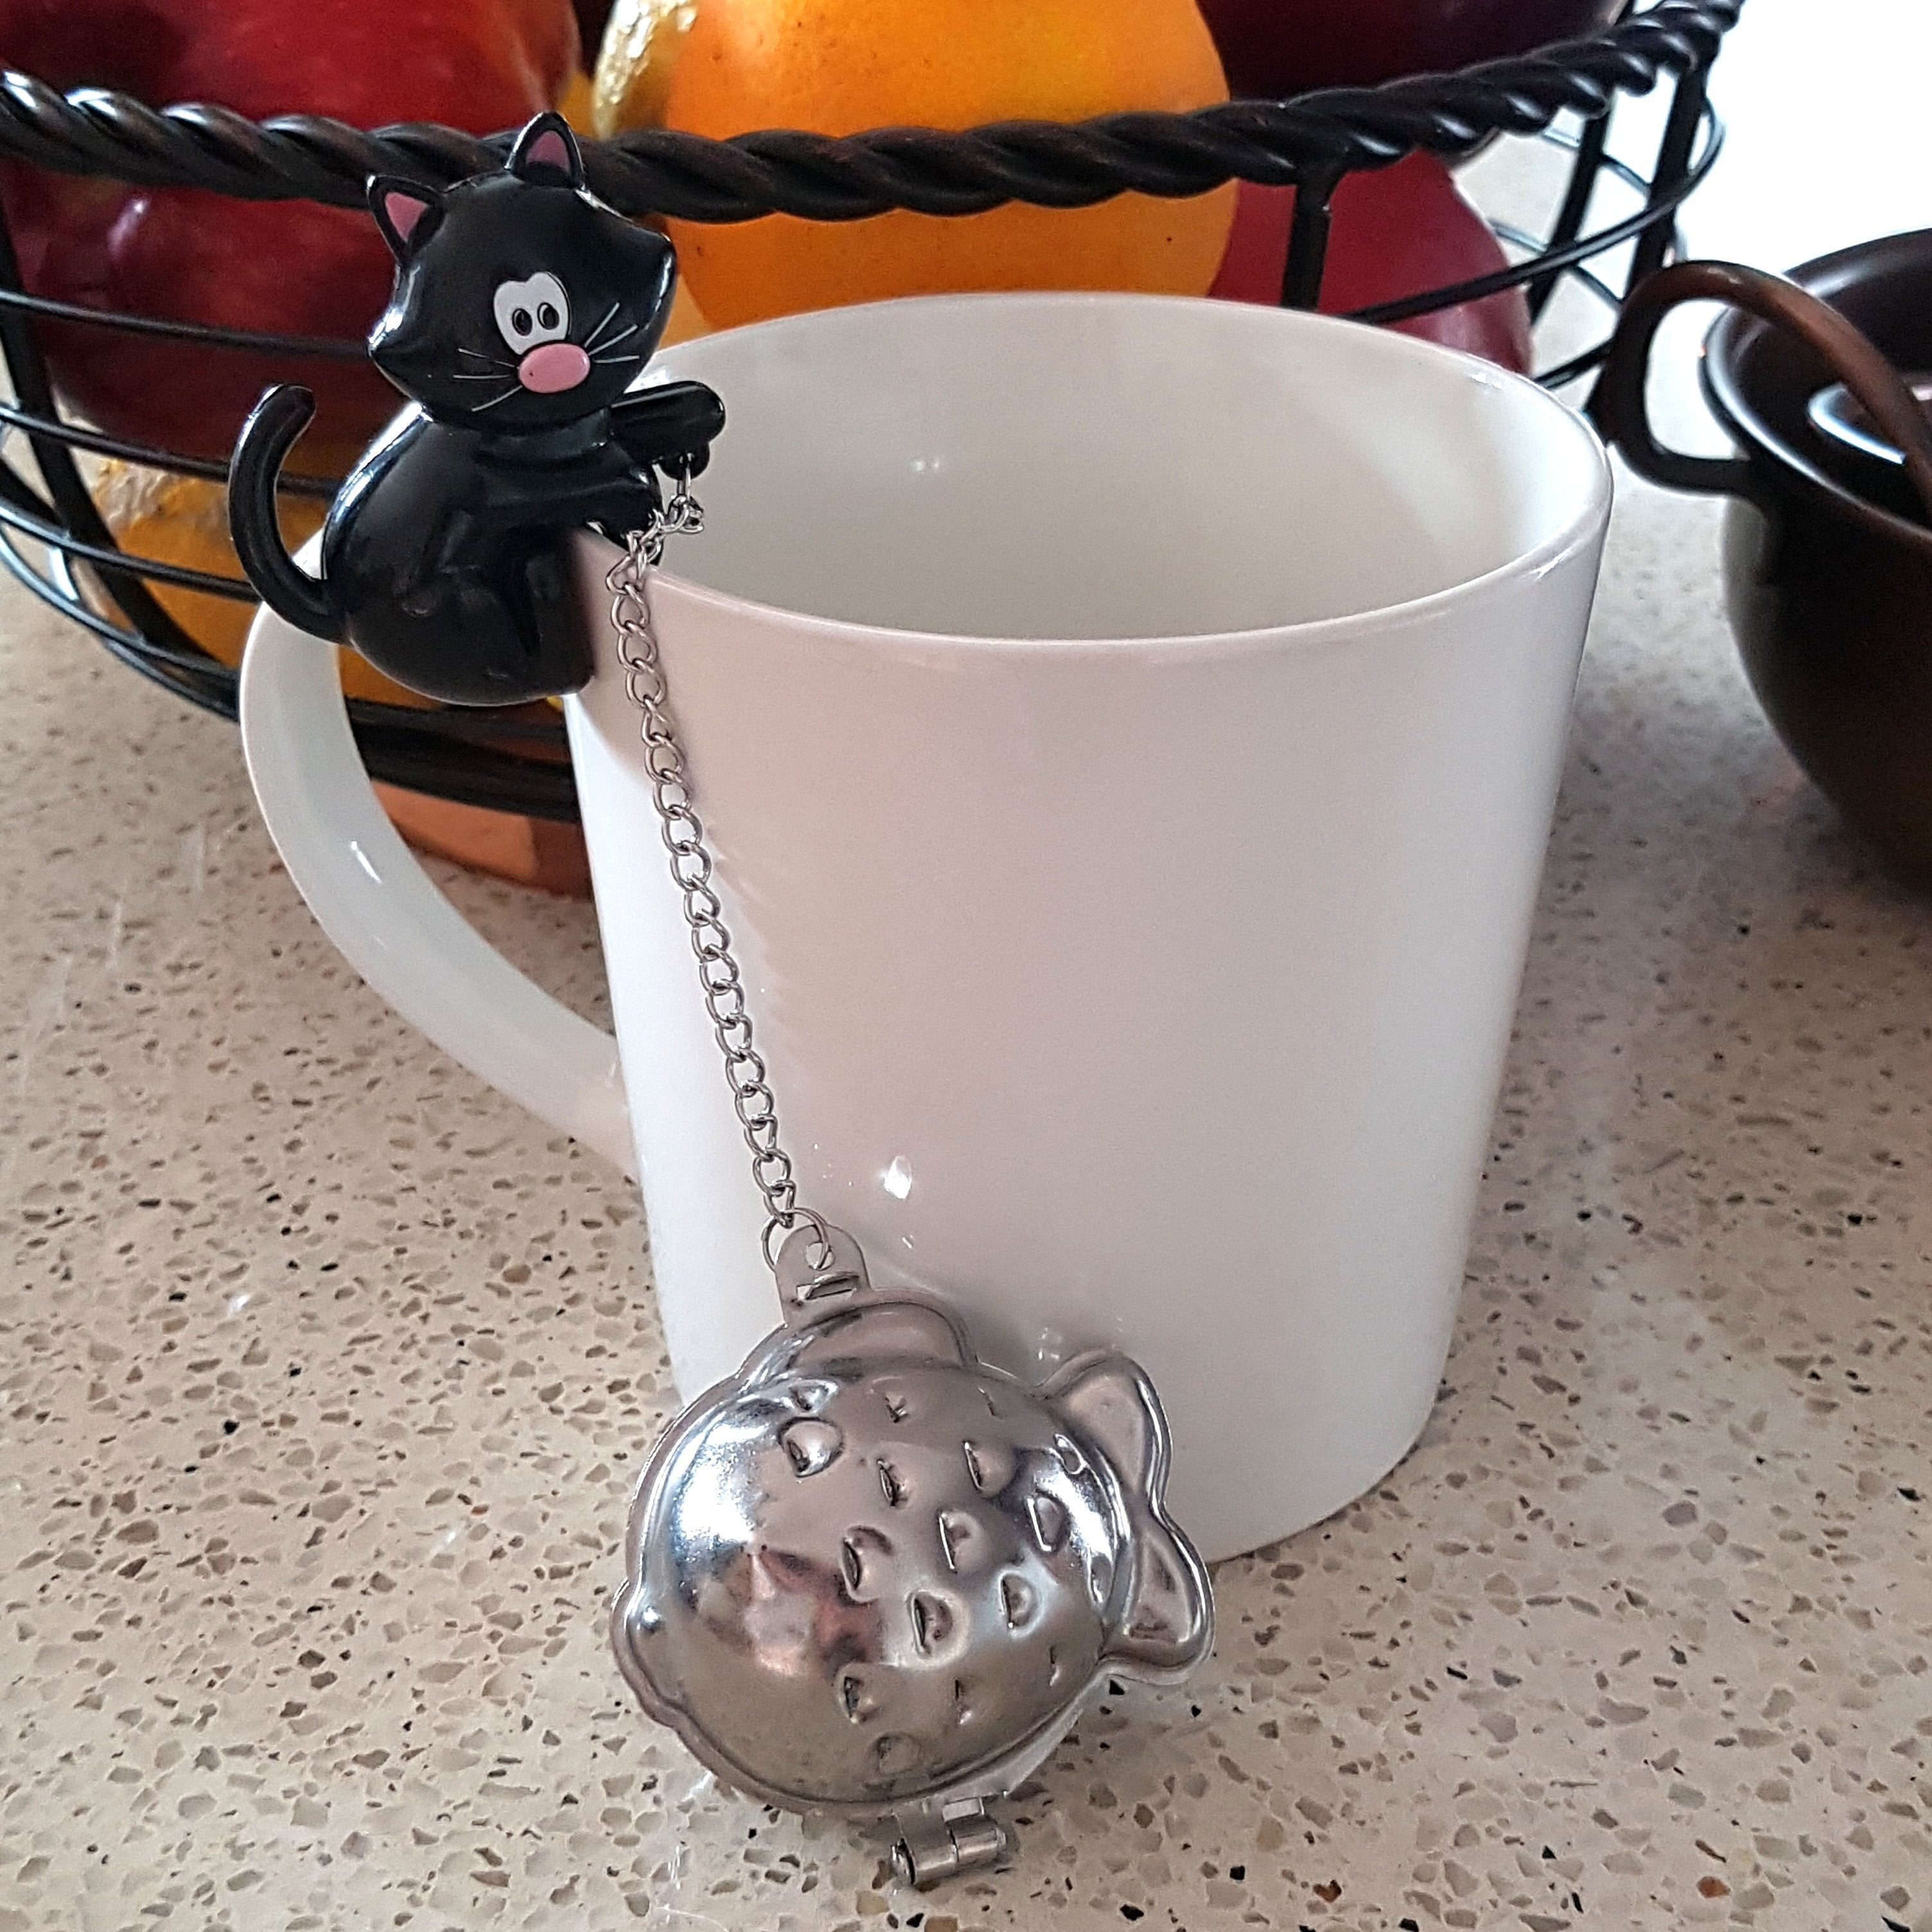 Cat Tea Strainer with a Black Cat and a Metal Fish Shaped Strainer